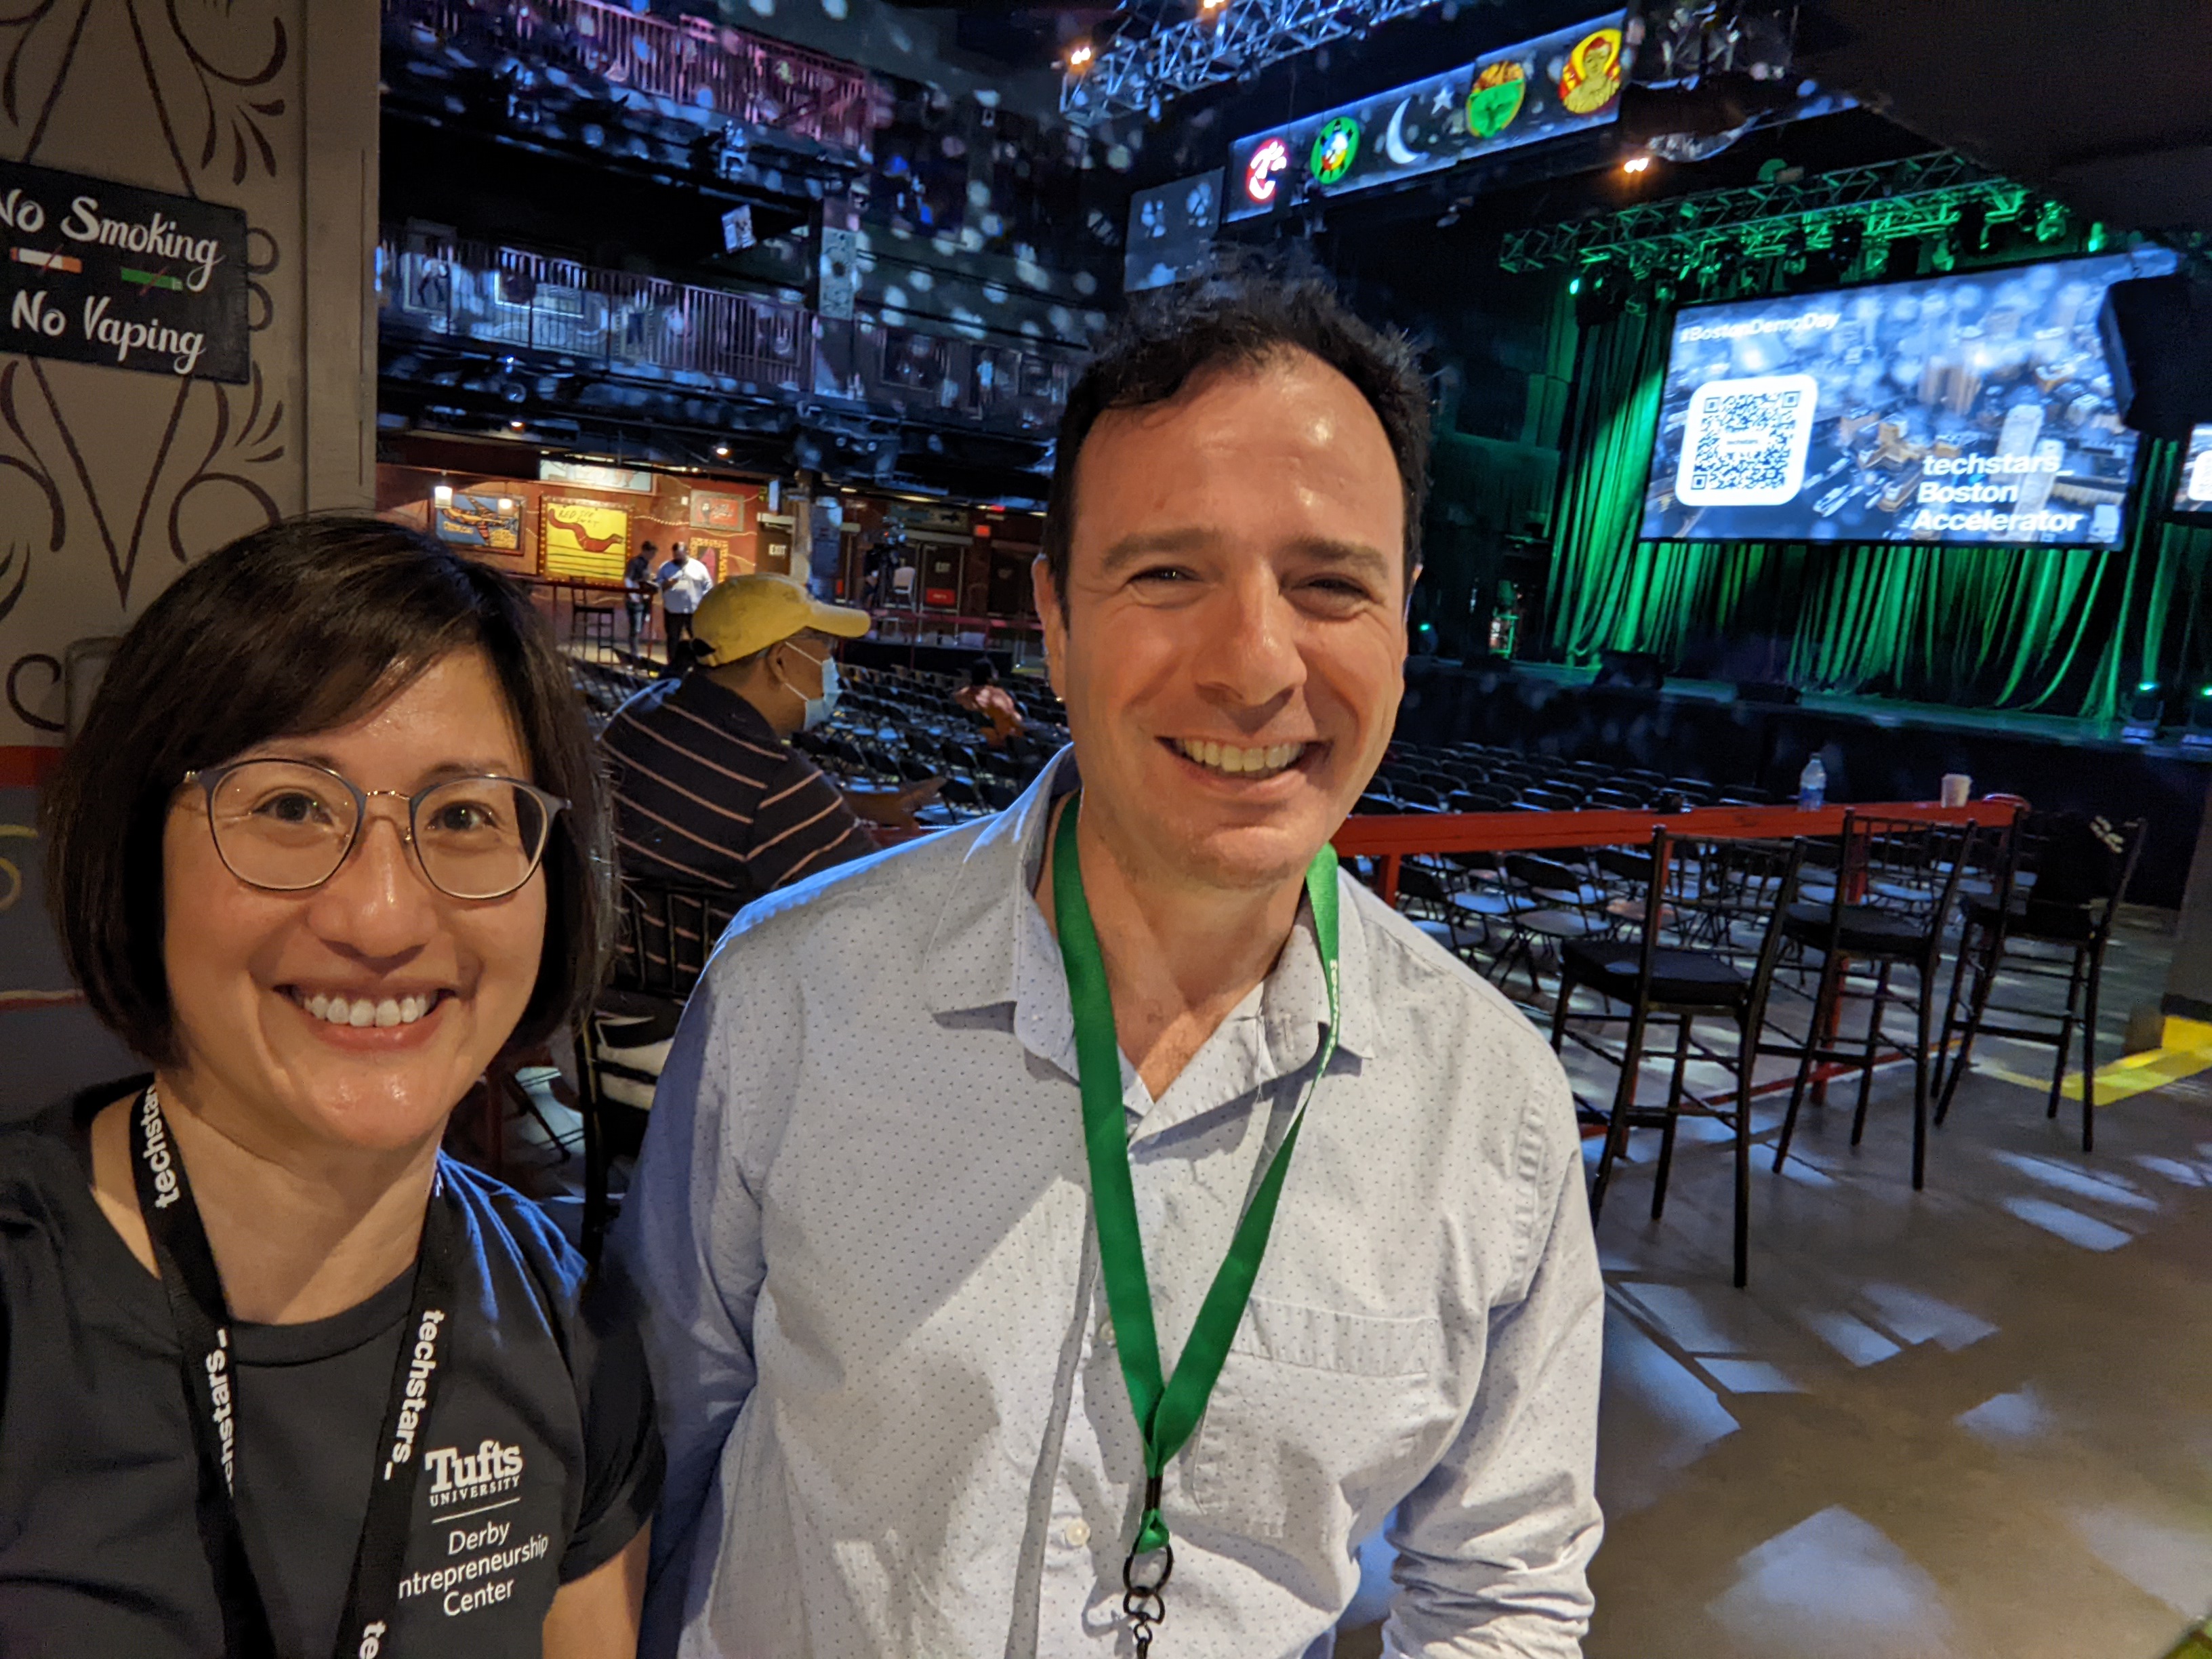 From left, Elaine Chen, Director of the Derby Entrepreneurship Center at Tufts, and Gregory Raiz, Managing Director at Techstars.